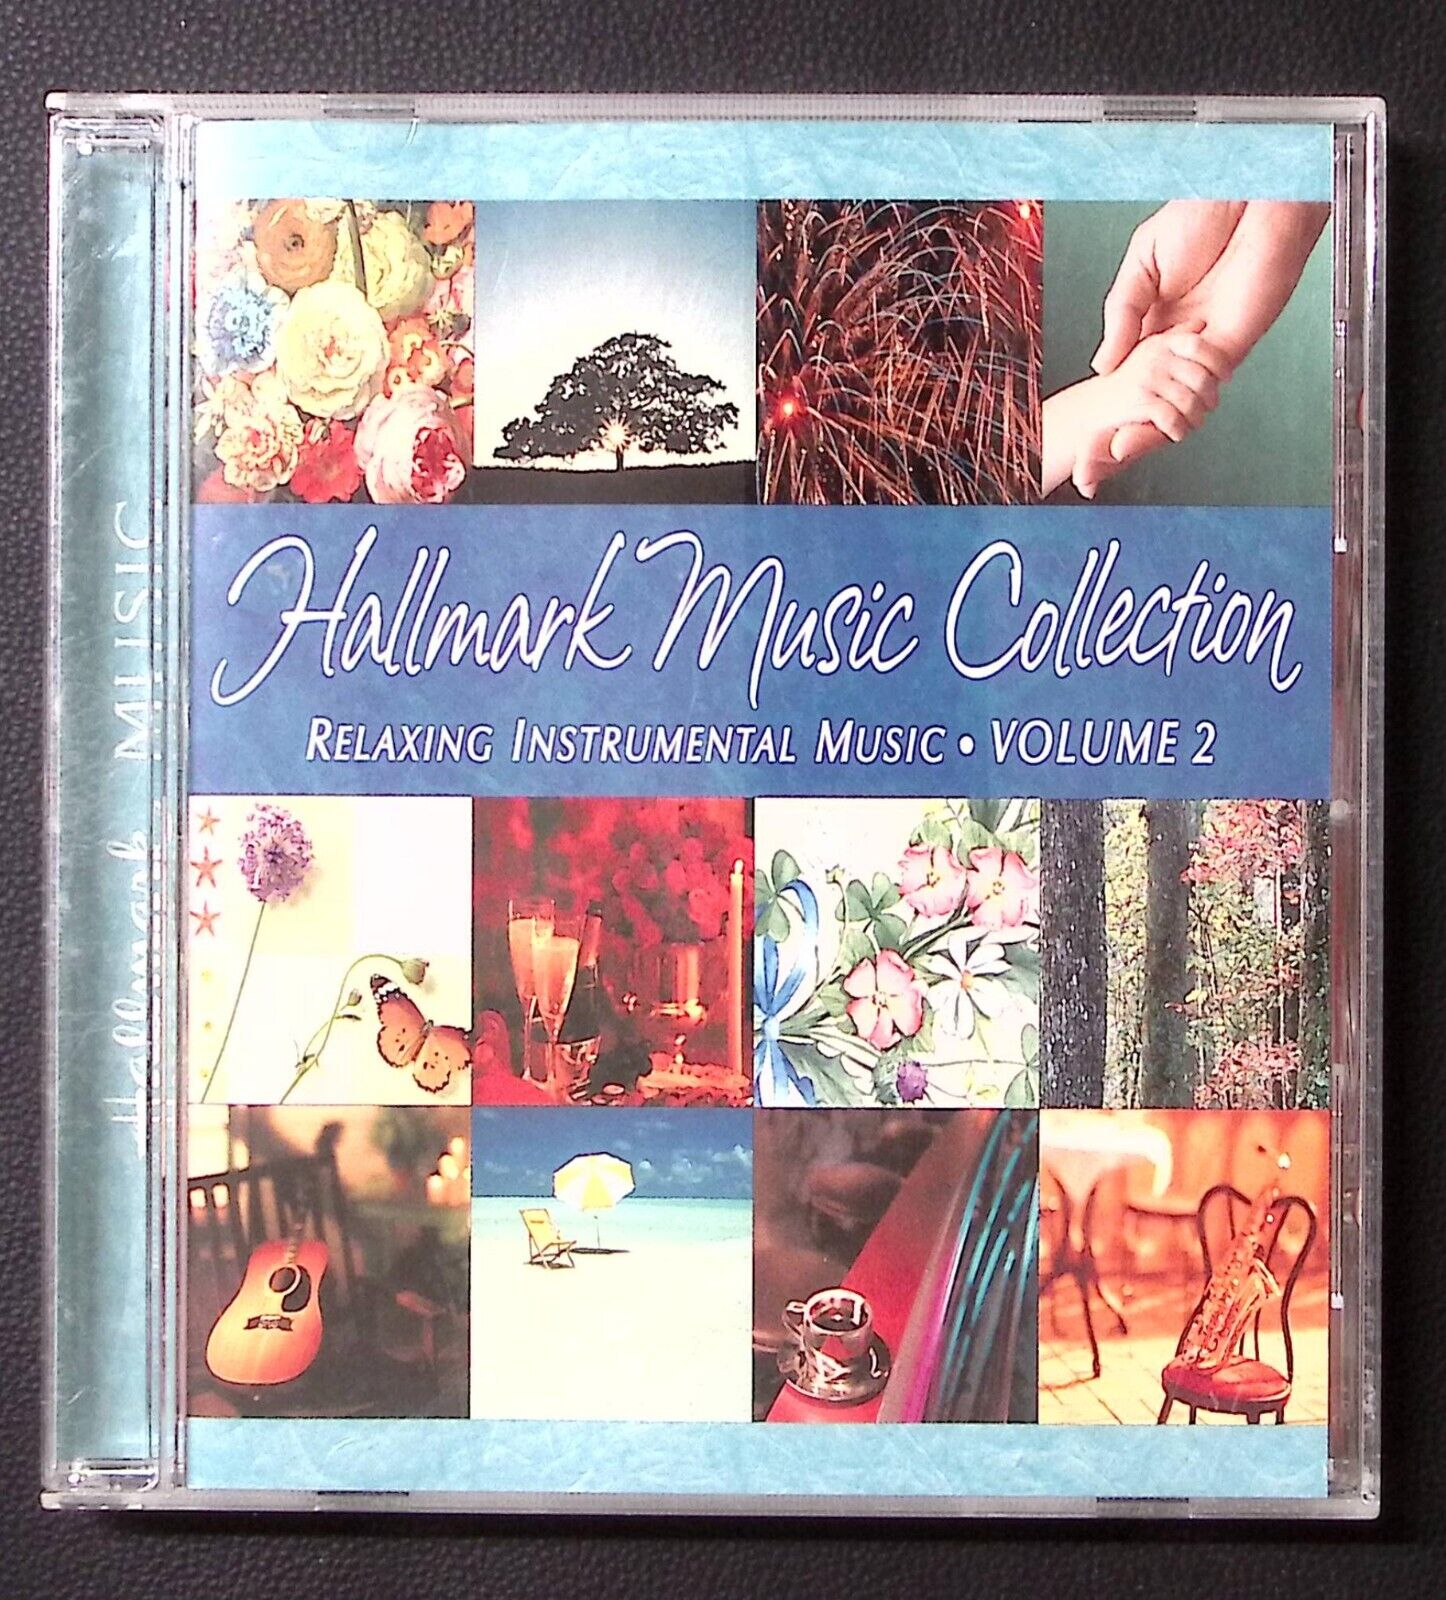 HALLMARK MUSIC COLLECTION  RELAXING INSTRUMENTAL MUSIC VOL 2  PROMO  CD 1701